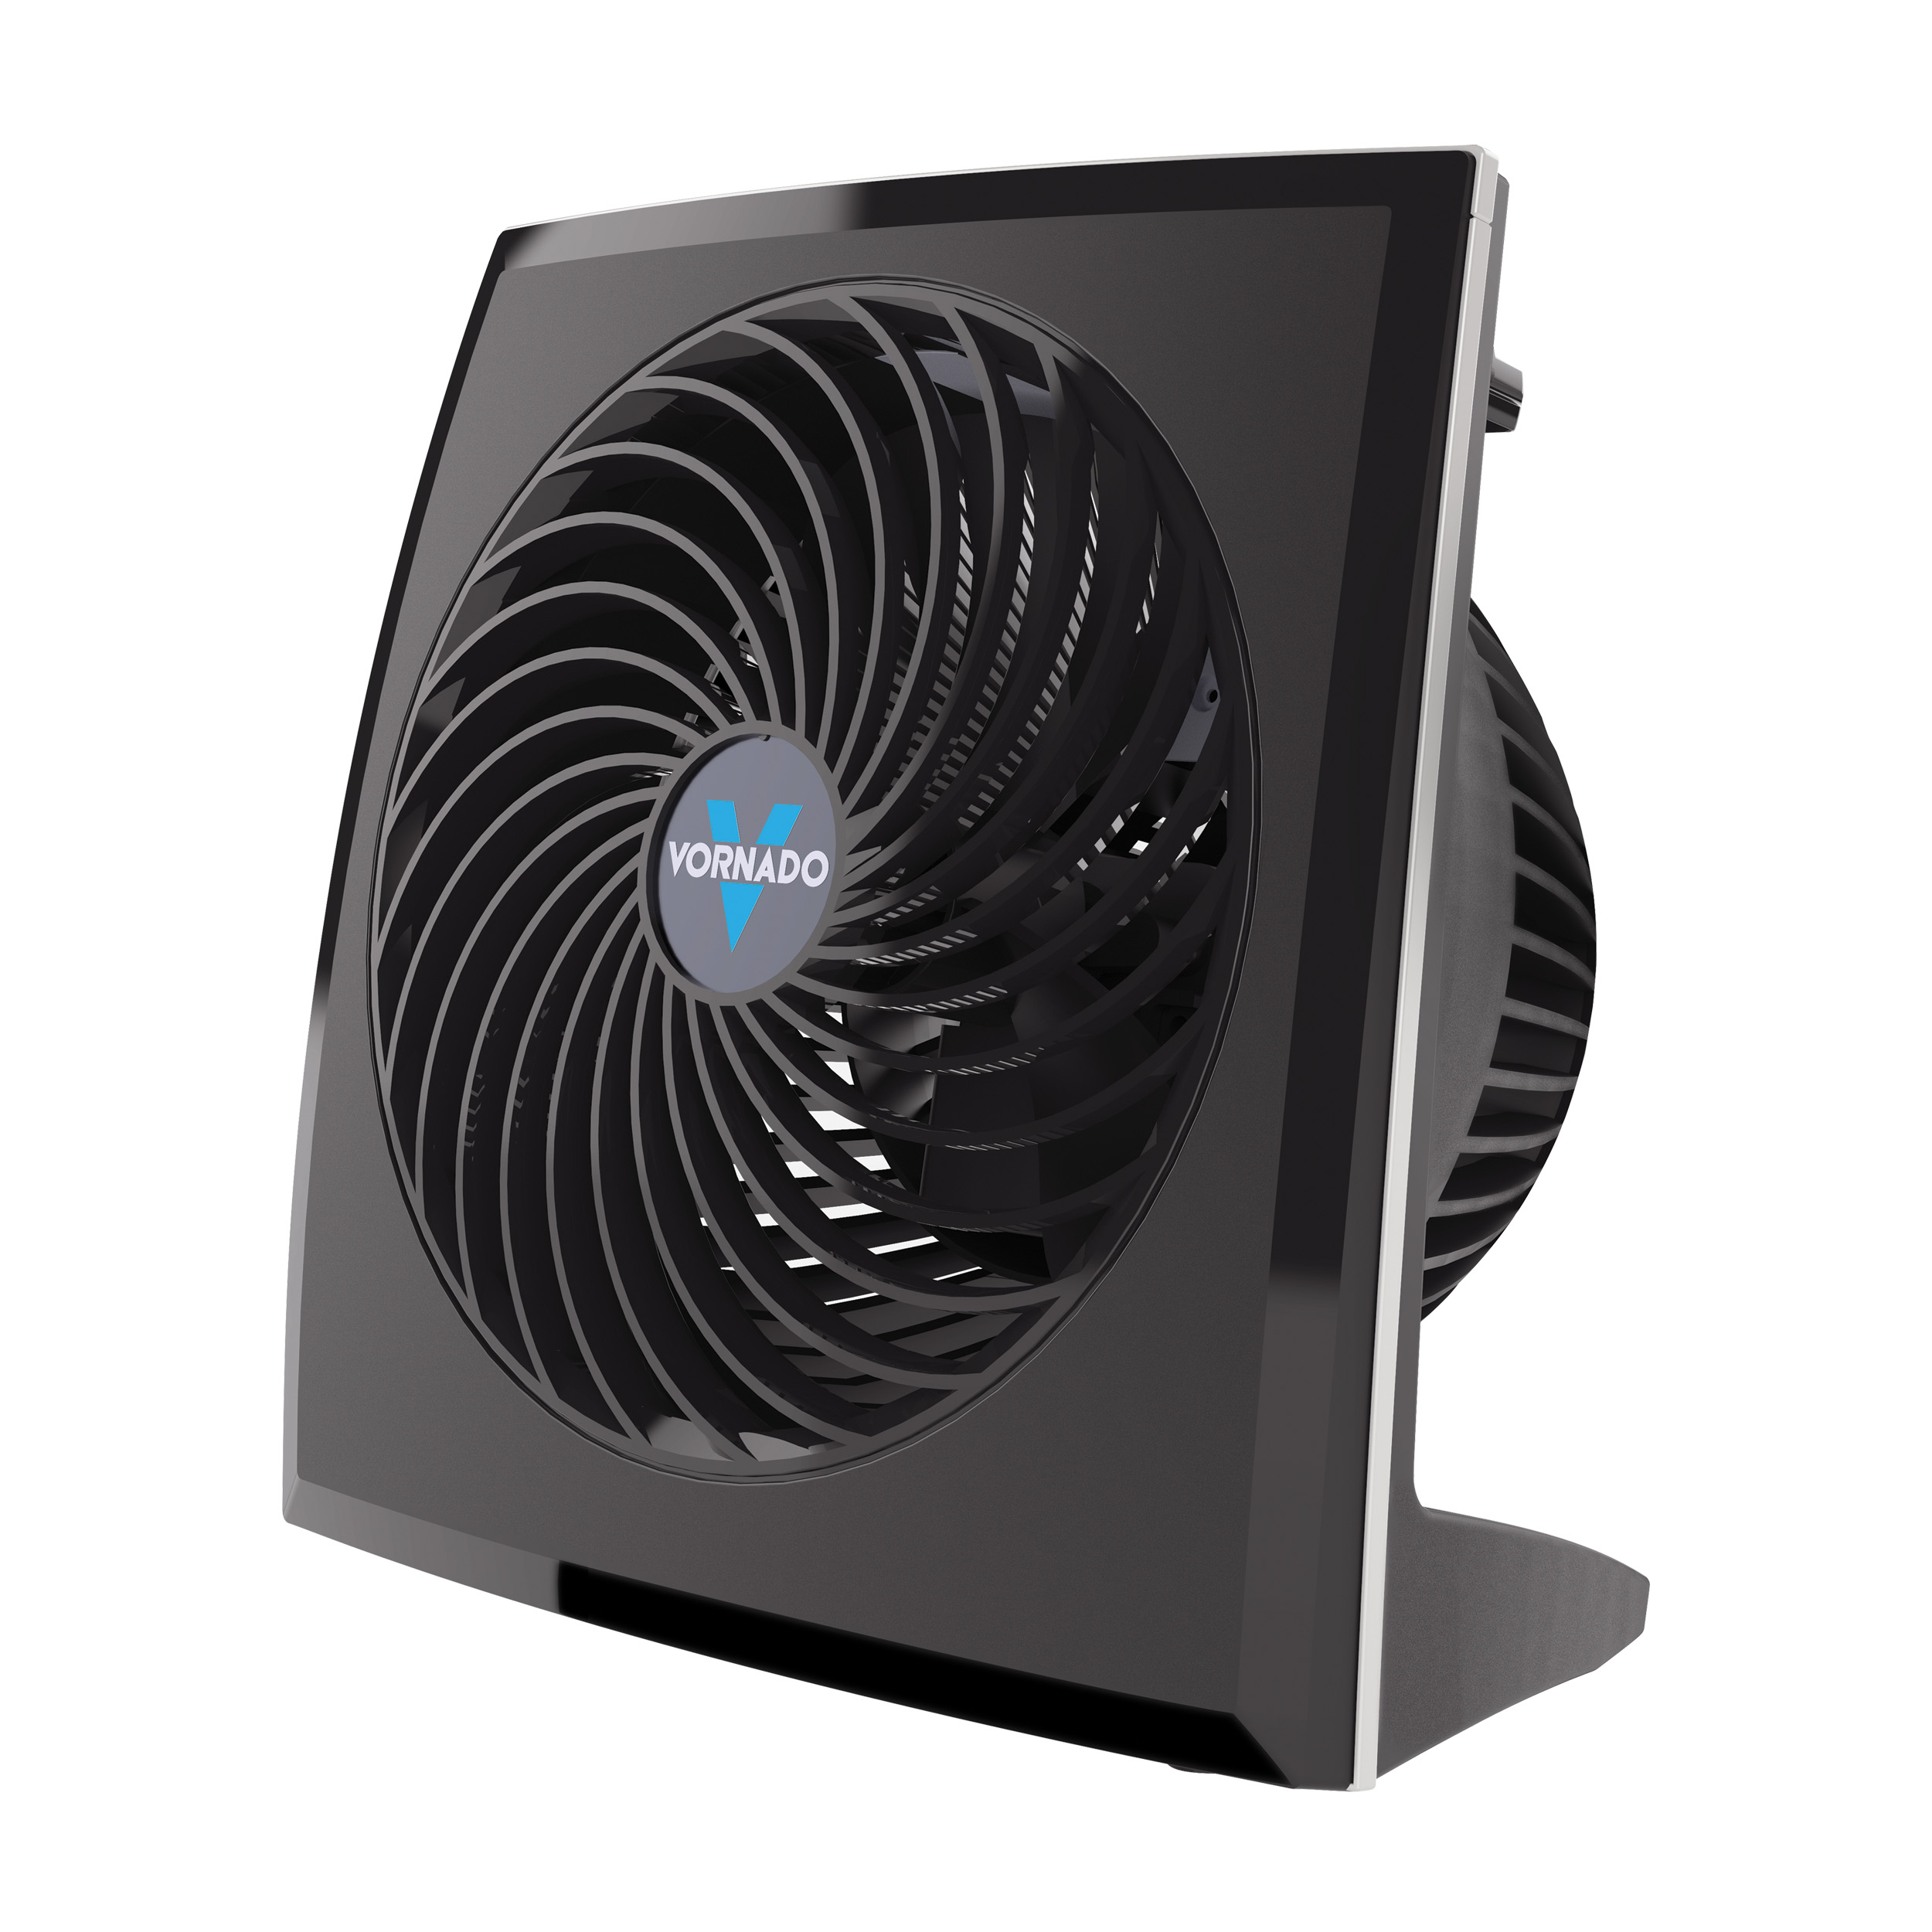 Vornado 573 Small Flat Compact Panel Whole Room Circulator Fan, 10" Height (New) - image 1 of 6